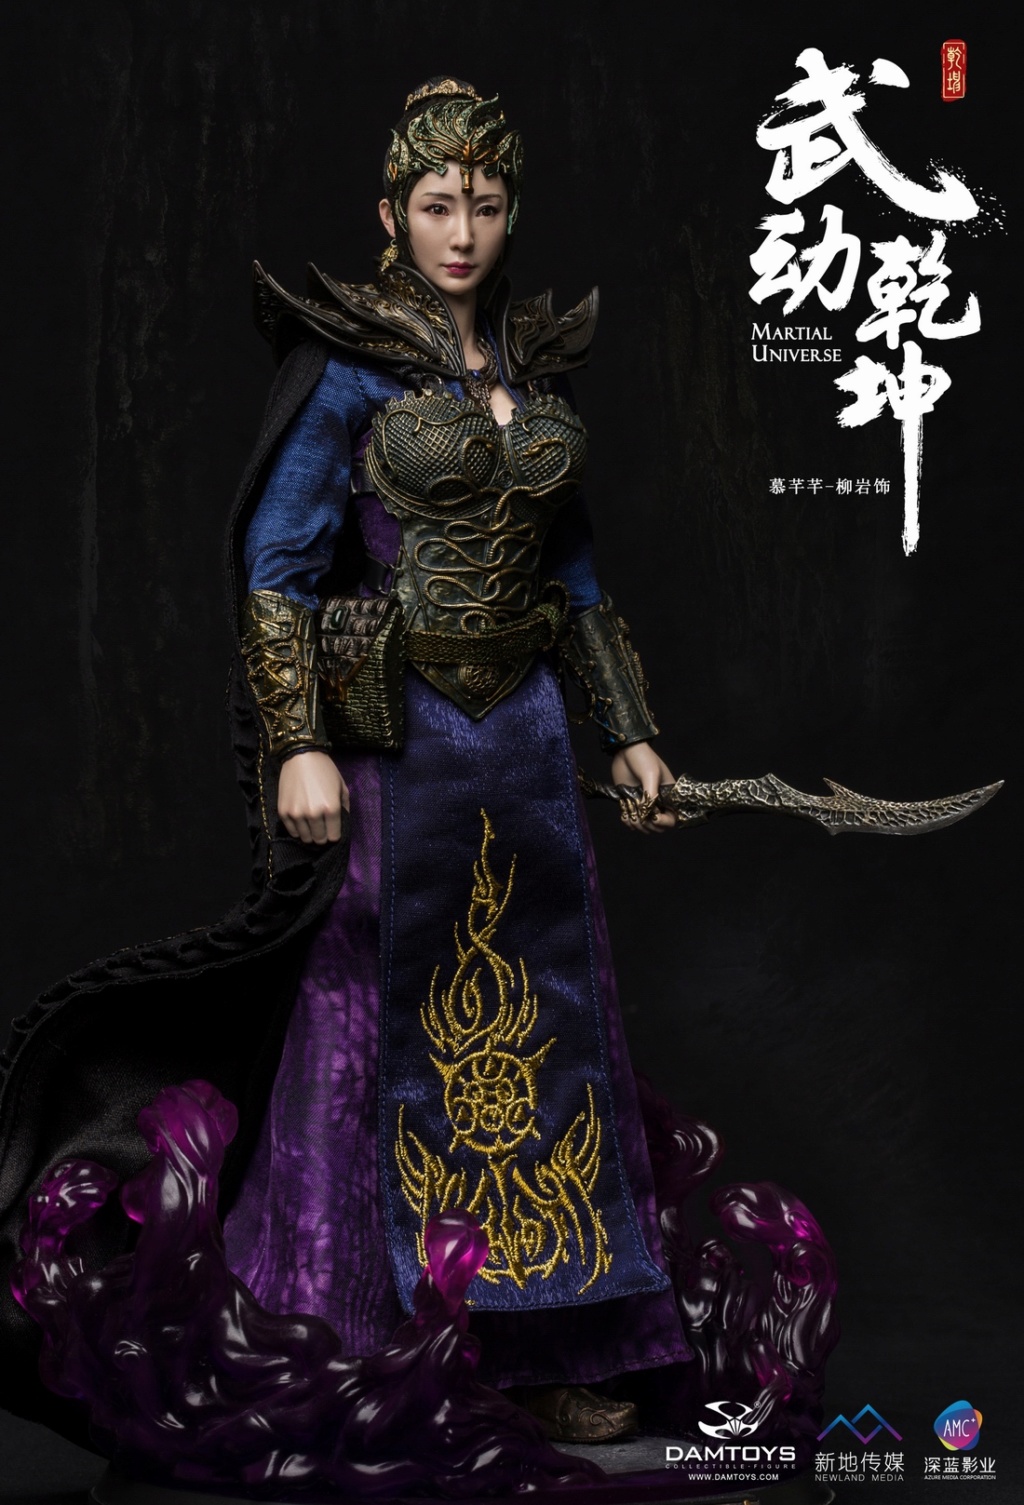 movie-based - NEW PRODUCT: DAMTOYS: 1/6 "The hero of the martial arts and spirits" - Mu Wei (Liu Yan ornaments) movable doll (DMS017) 09551310